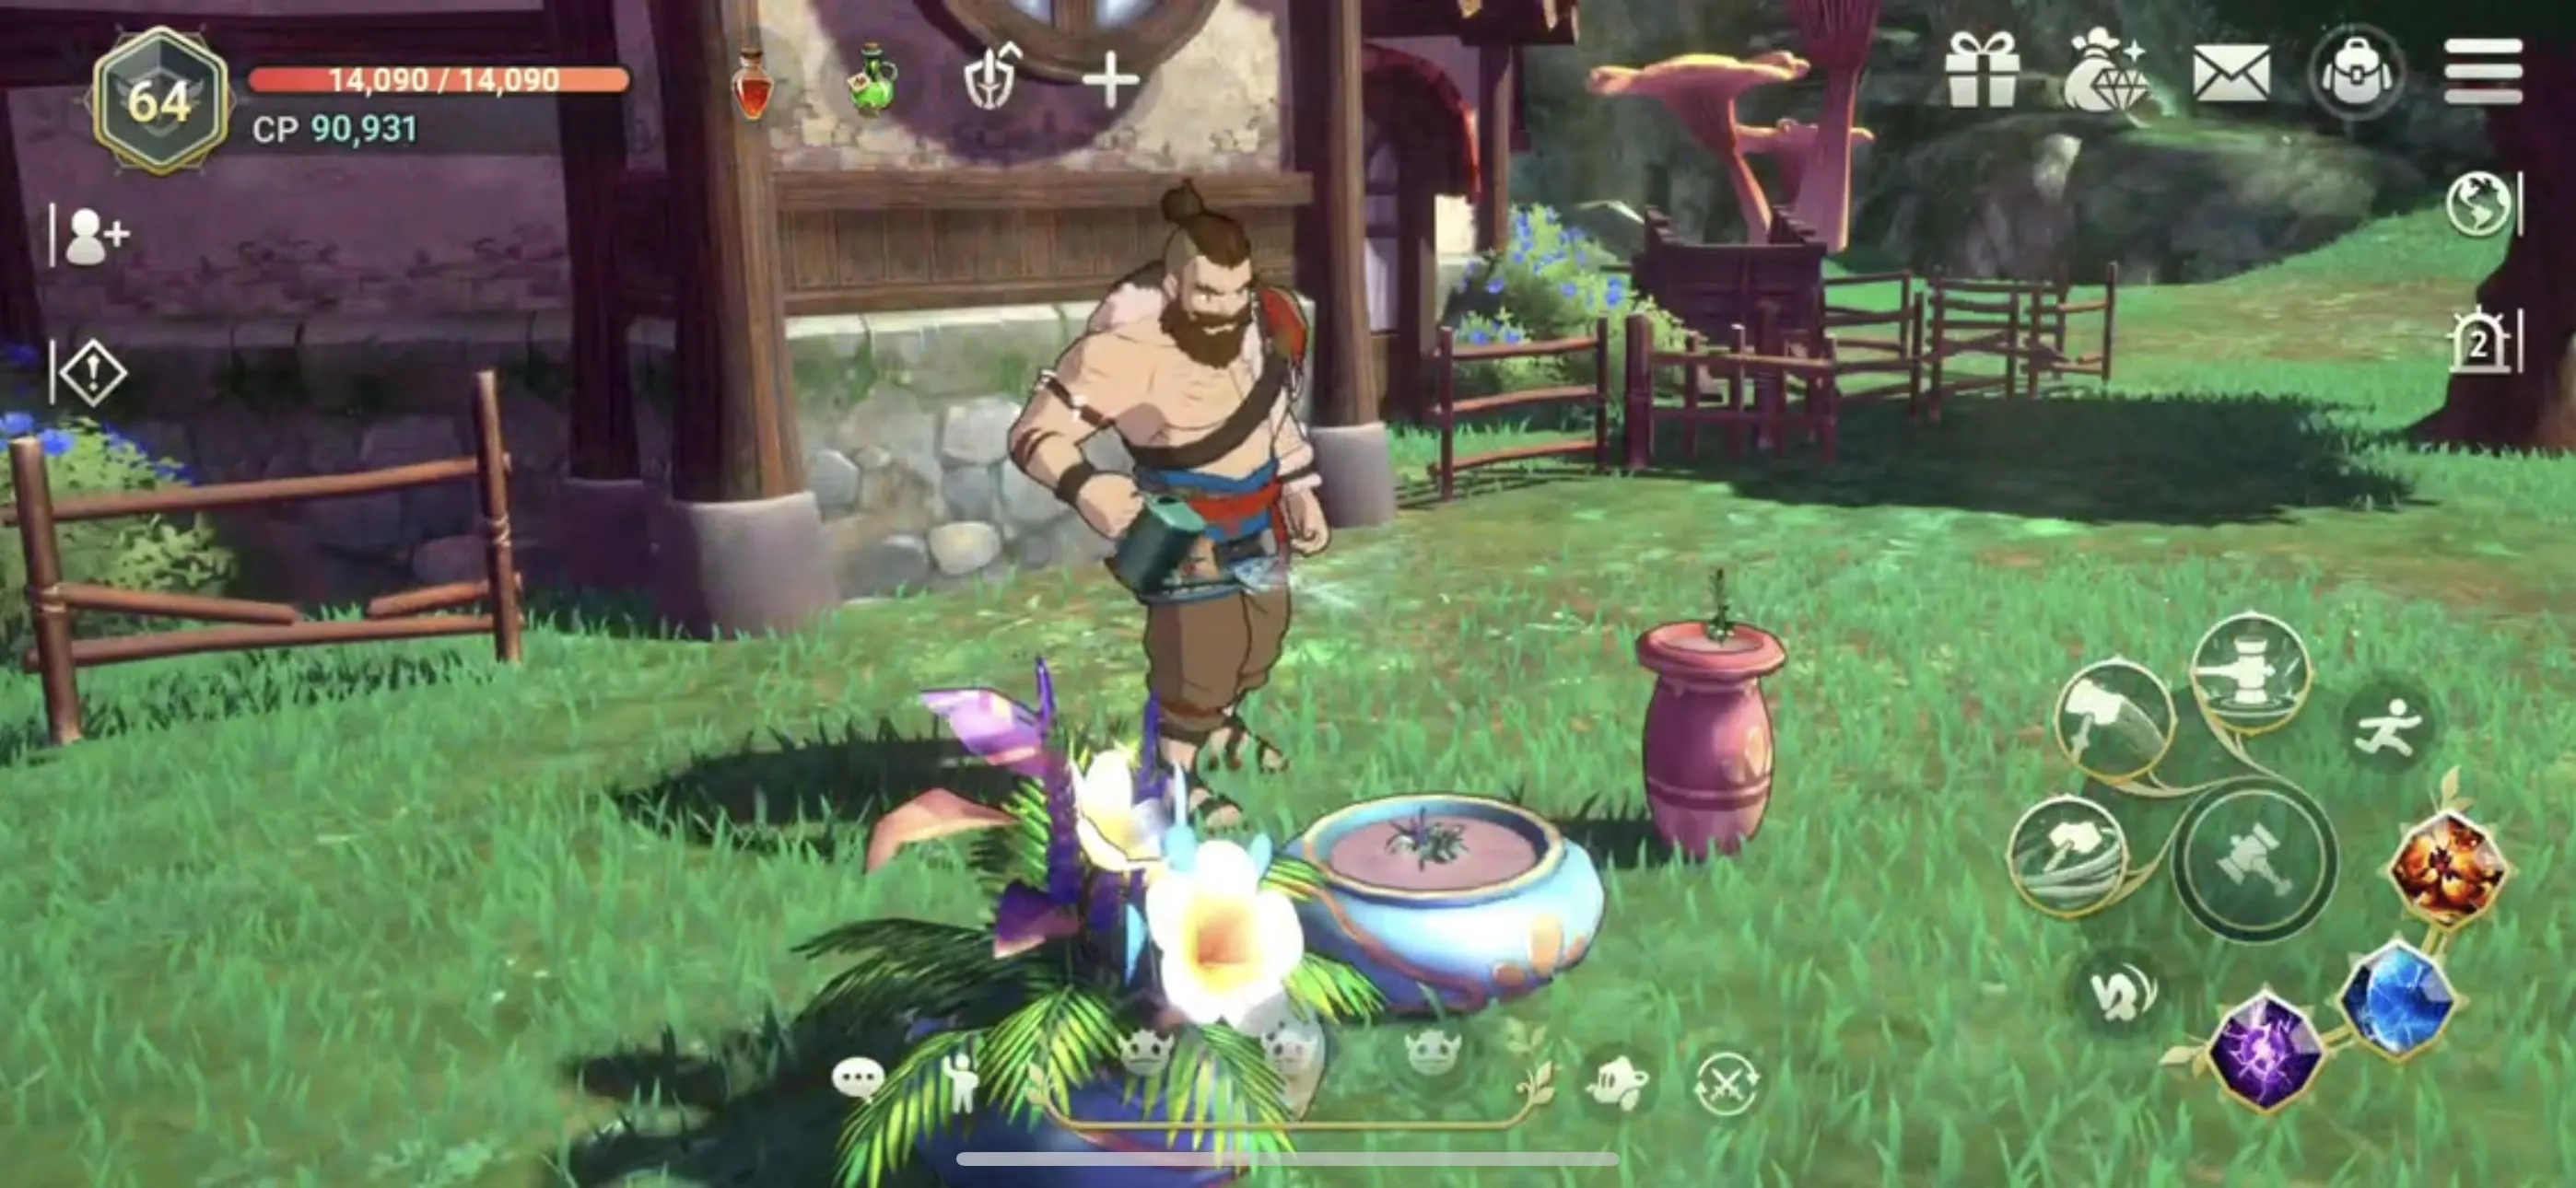 Players in the game can grow crops by planting a garden in their farm, and this can be exchanged for other decorative items such as cottages and tents.